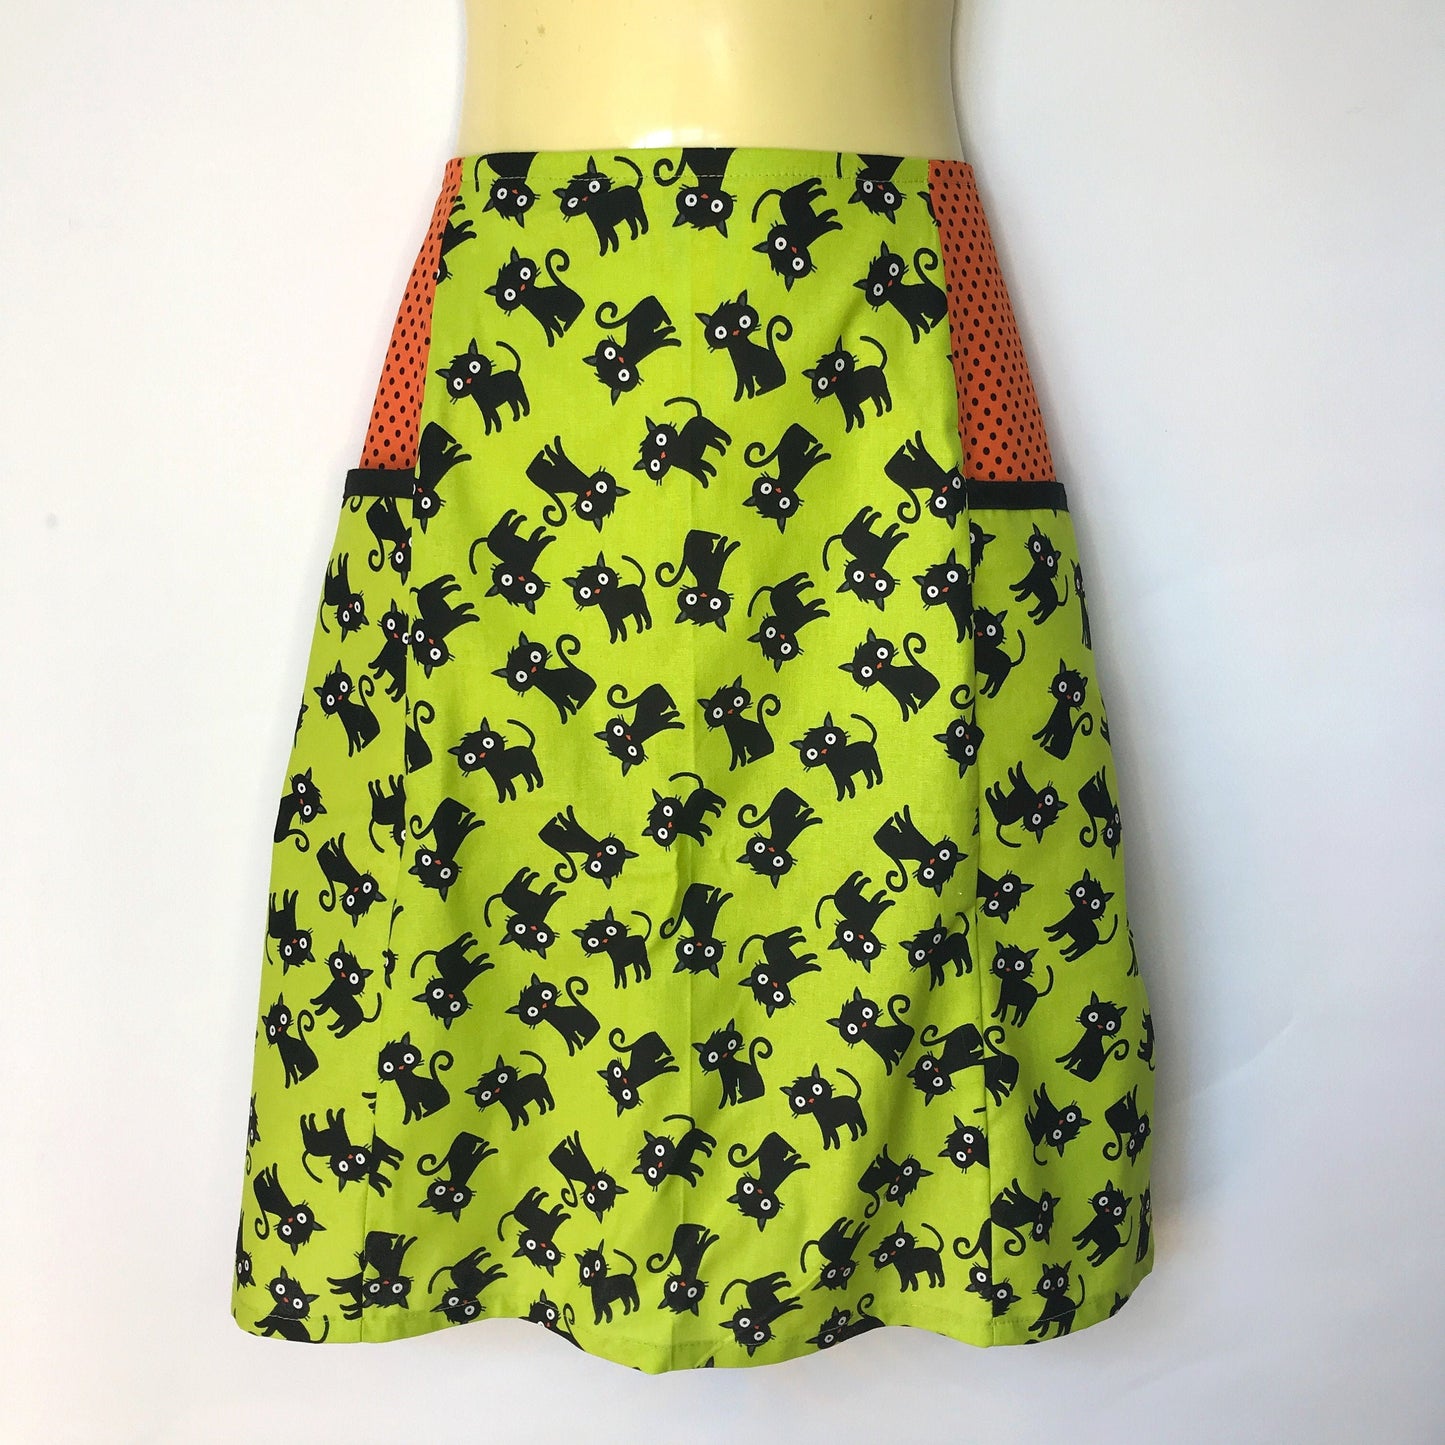 Ladies A Line Skirt - Lime green cats - sizes 8 - 18